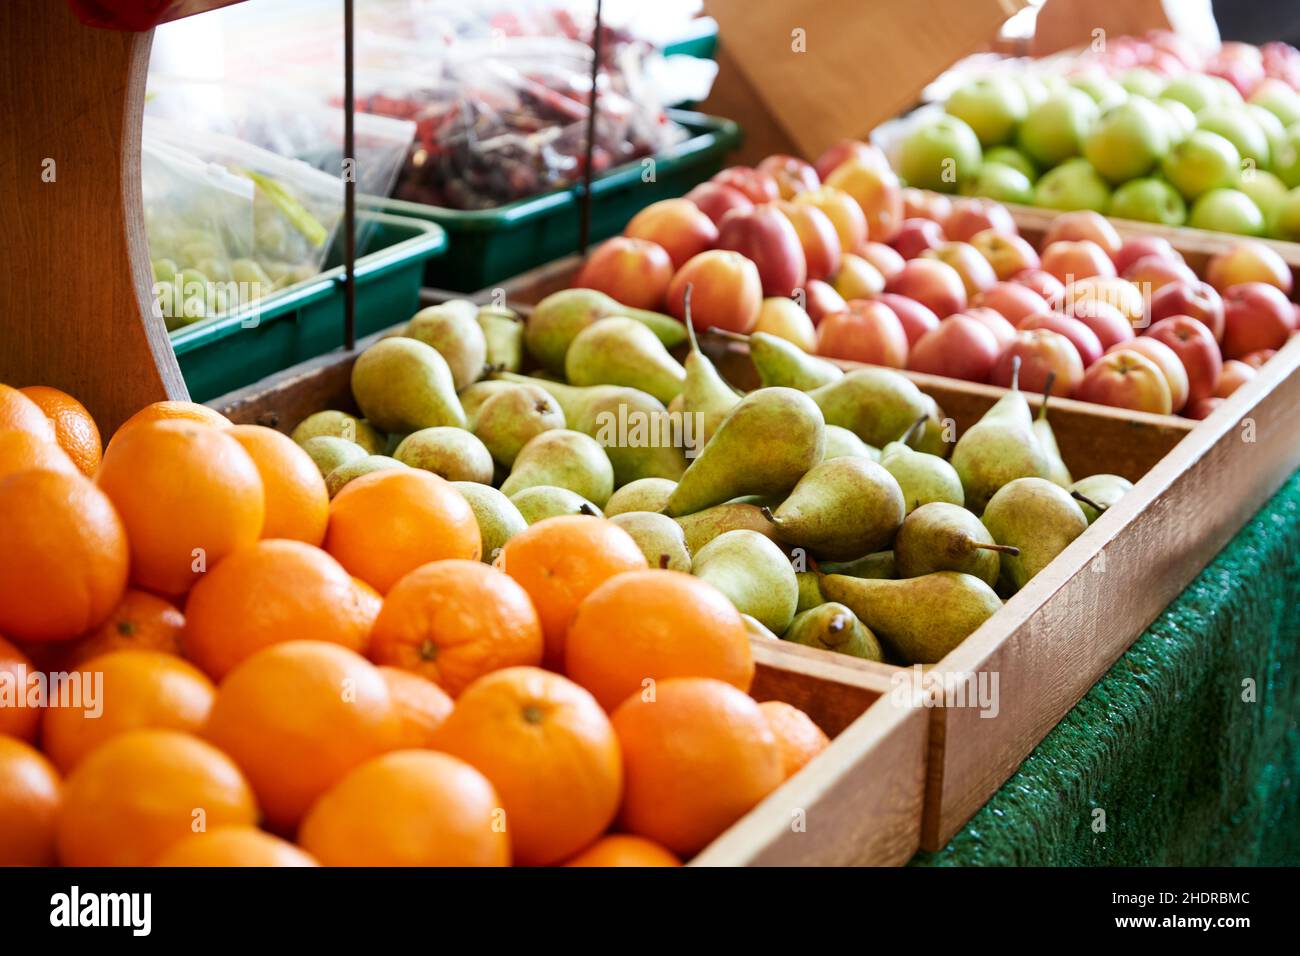 Fruit Grocery Store Fruits Grocers Grocery Stores 2HDRBMC 